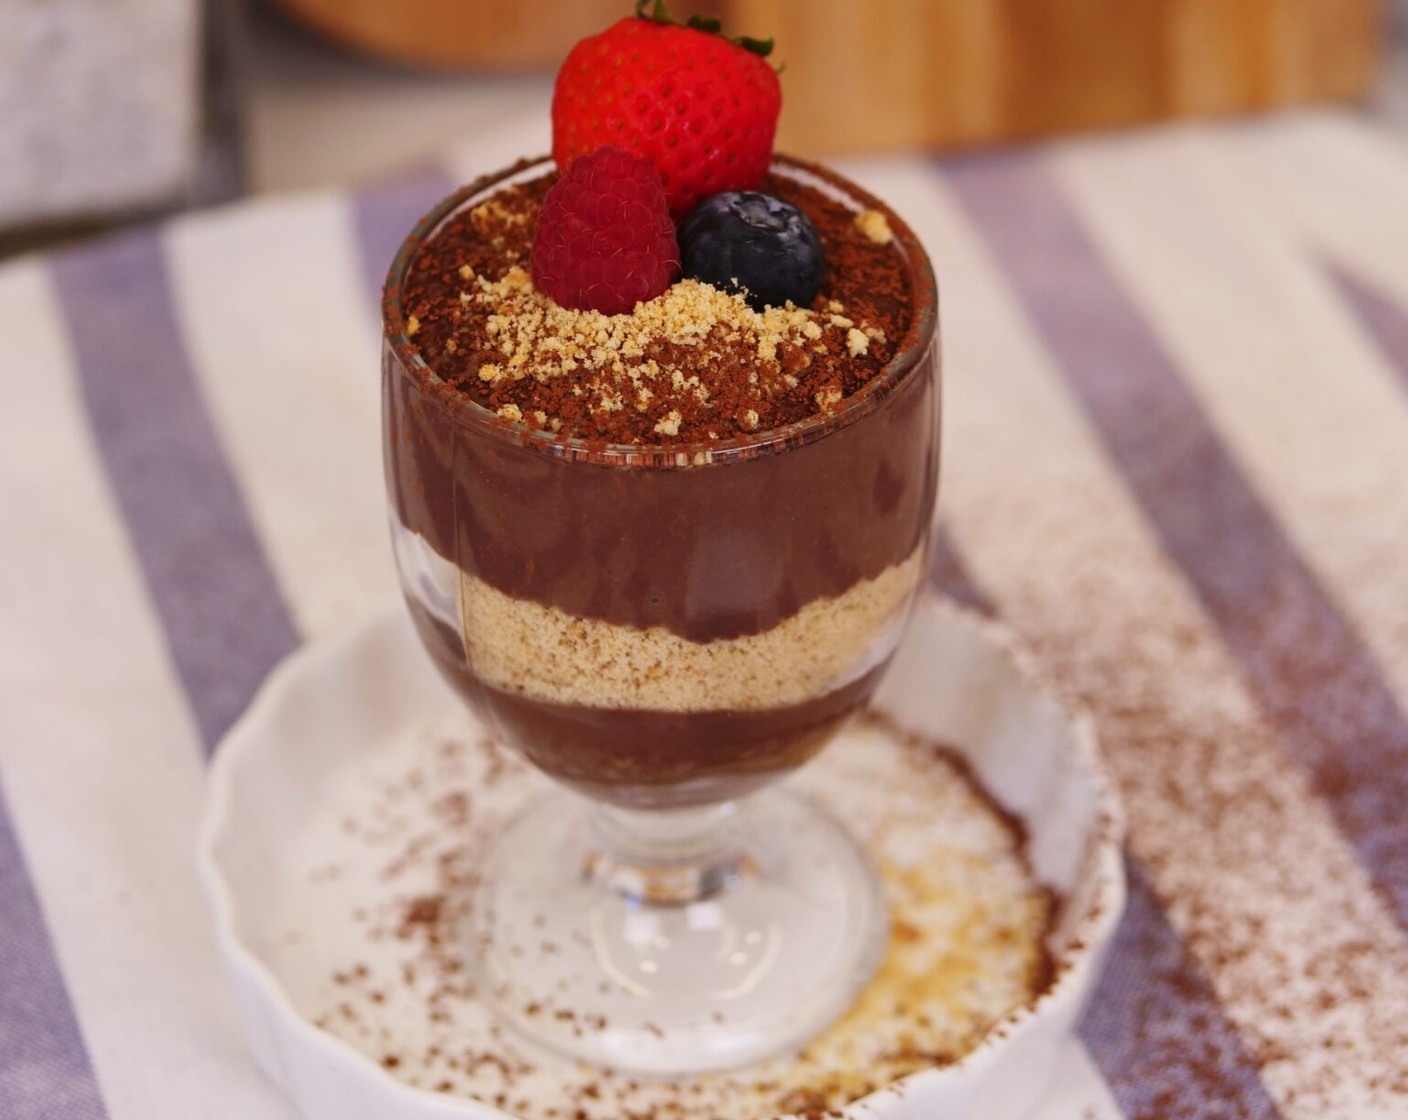 step 4 Dust with some extra cocoa powder and garnish with some Fresh Mixed Berries (to taste) when serving.